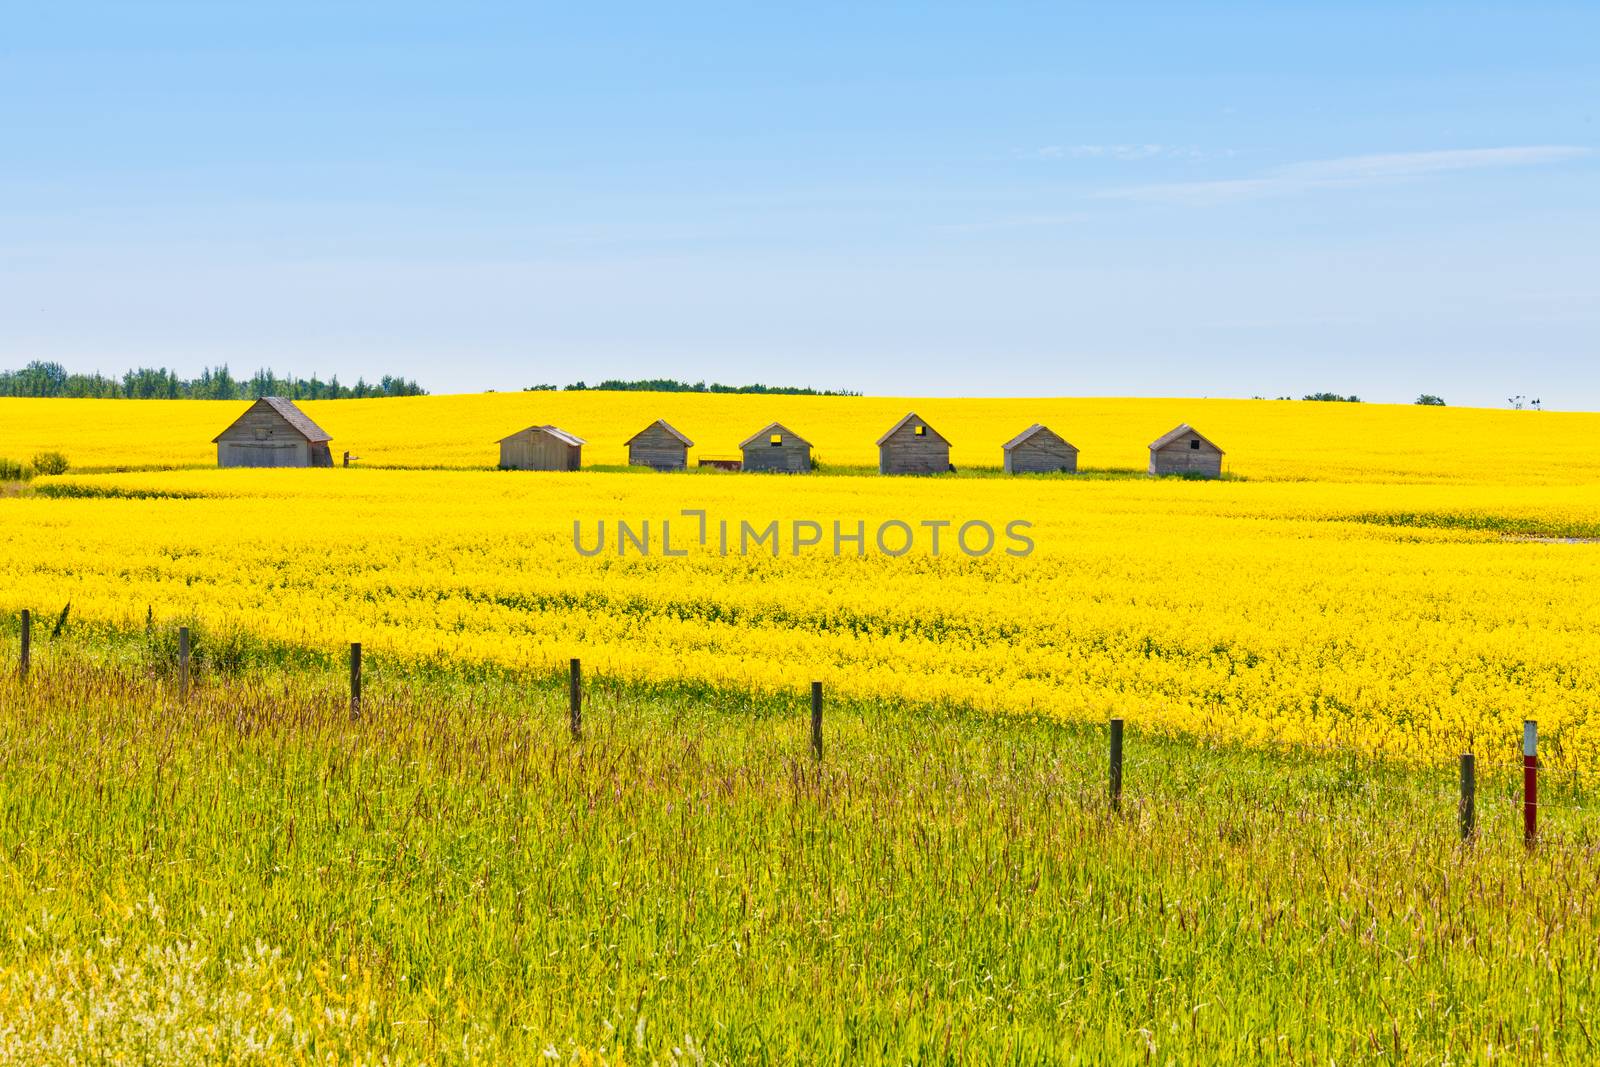 Old obsolete farm huts row lined up in field of bright yellow canola rapeseed with neutral sky in Alberta Canada